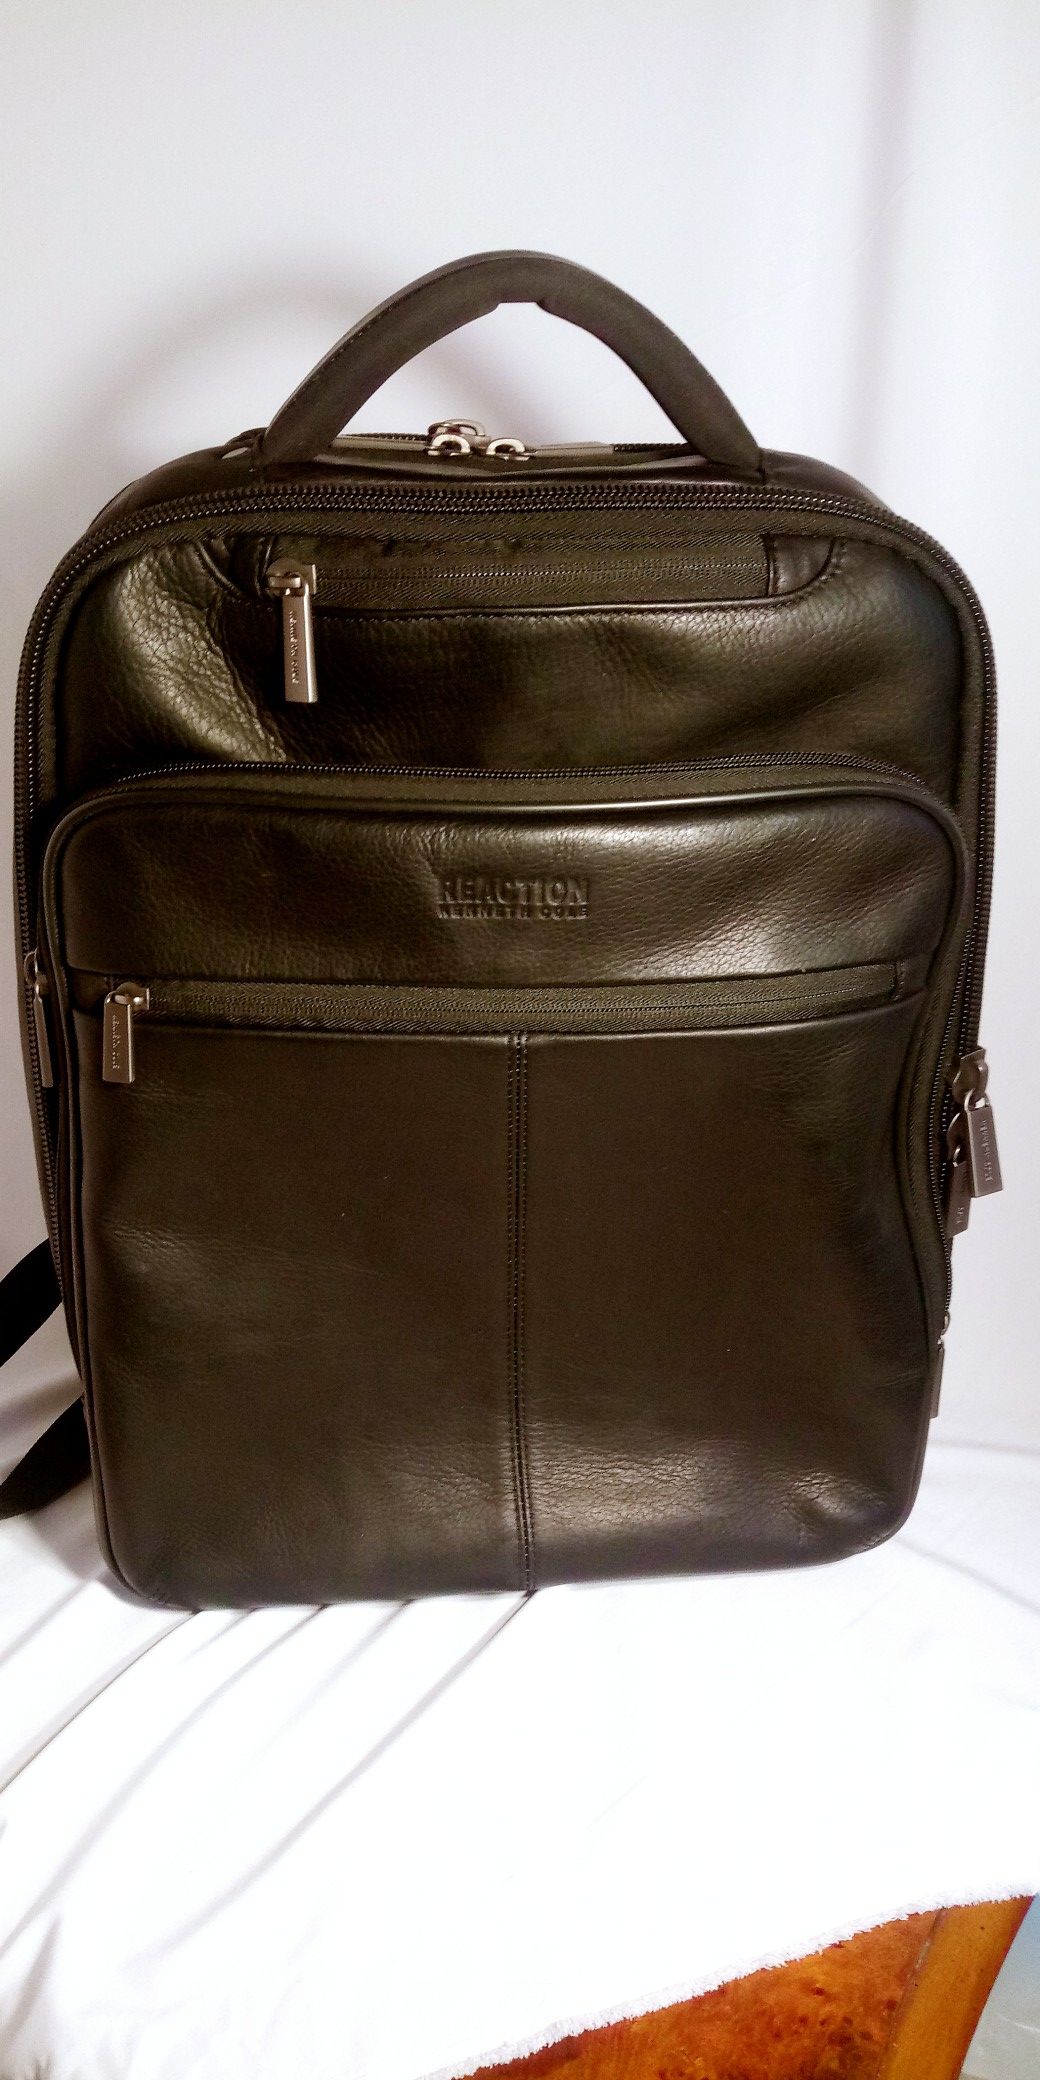 New Leather Kenneth Cole Reaction backpack